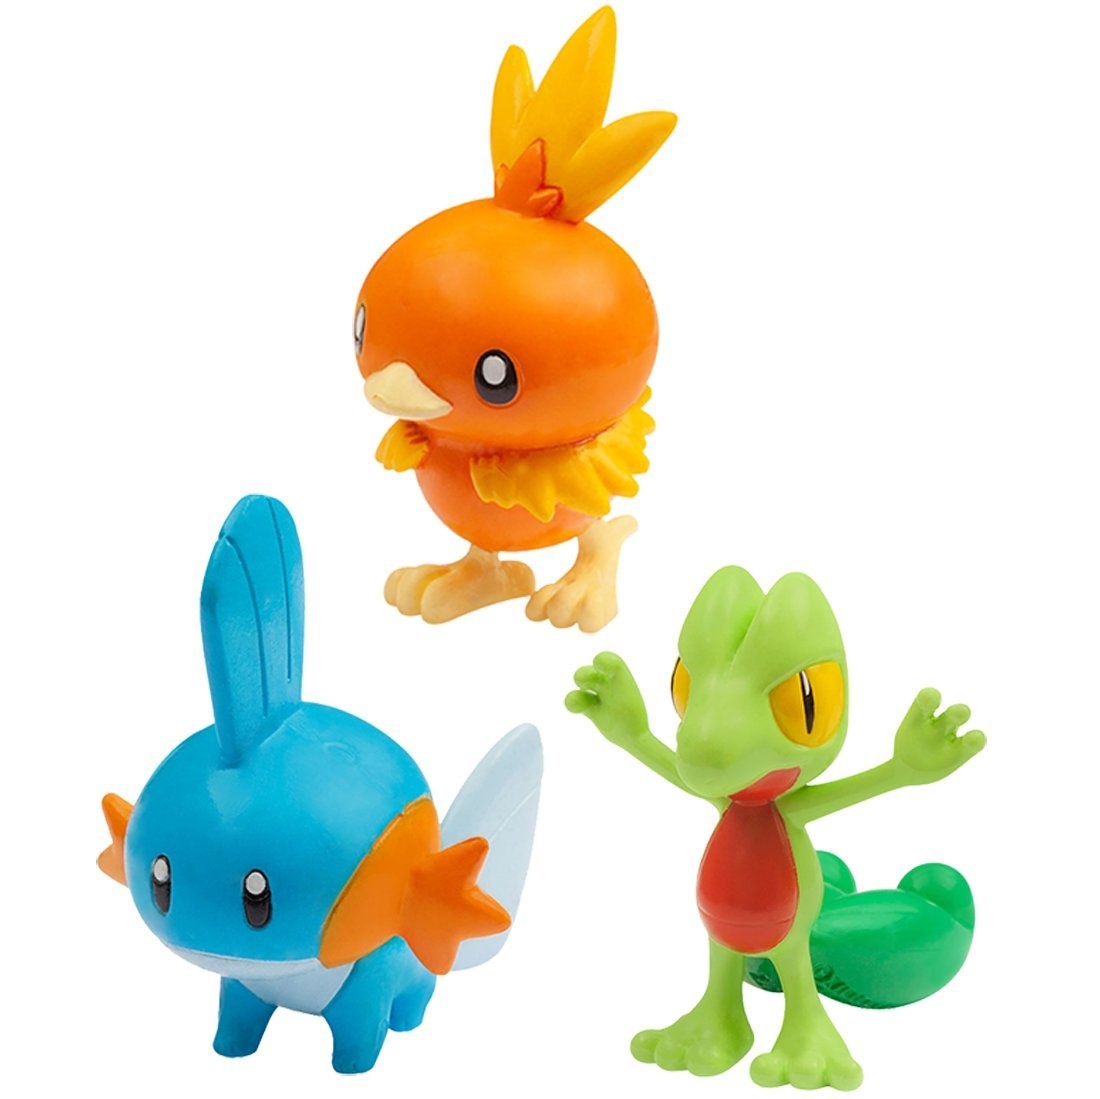 Pokemon – Super Toys and Hobbies